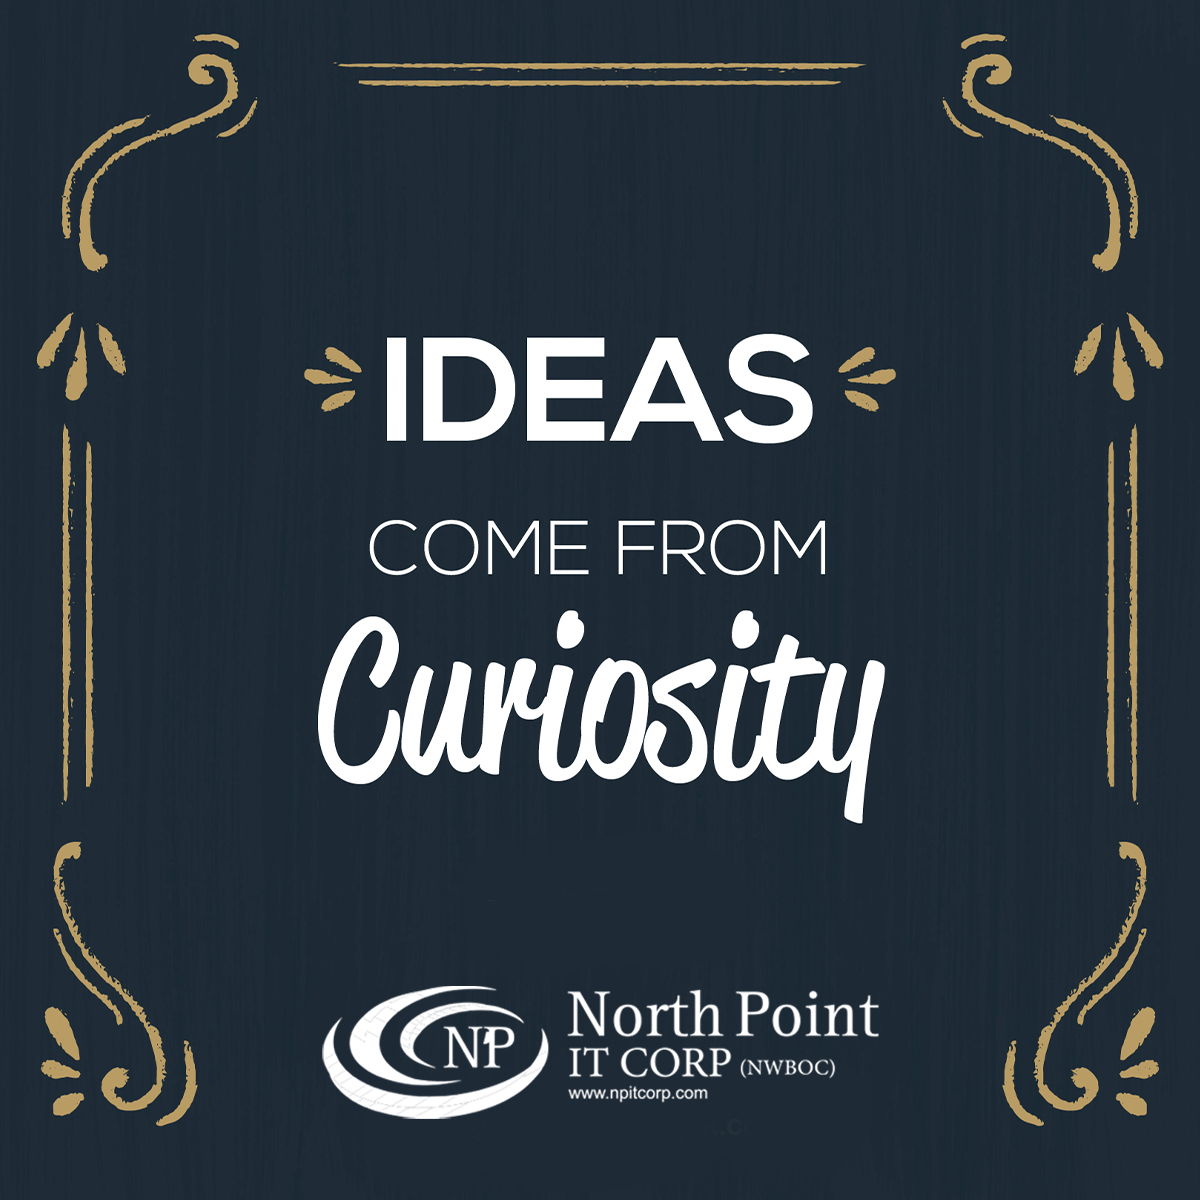 Ideas come from curiosity.

#NorthPoint #hrconsultant #newjobs #creativity #training #motivation #leadershipskills #success #leadershipdevelopment #federaljobs #statejobs #federalgovernment #services #talented #business #ideas #come #curiosity